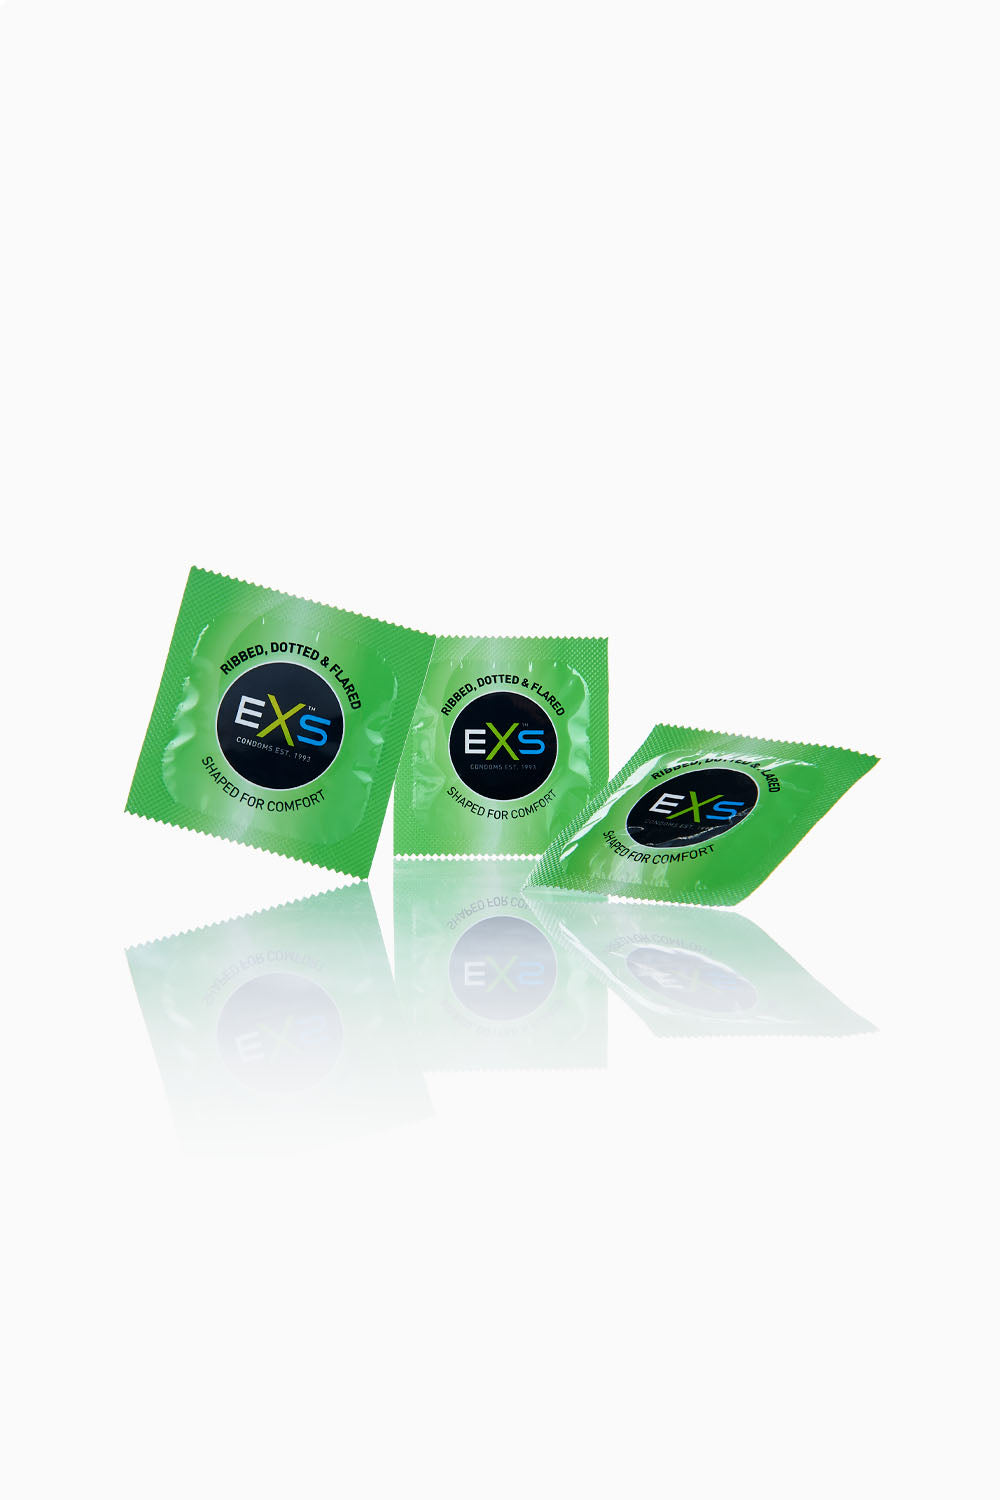 EXS Ribbed, Dotted & Flared Condoms 100 Pack